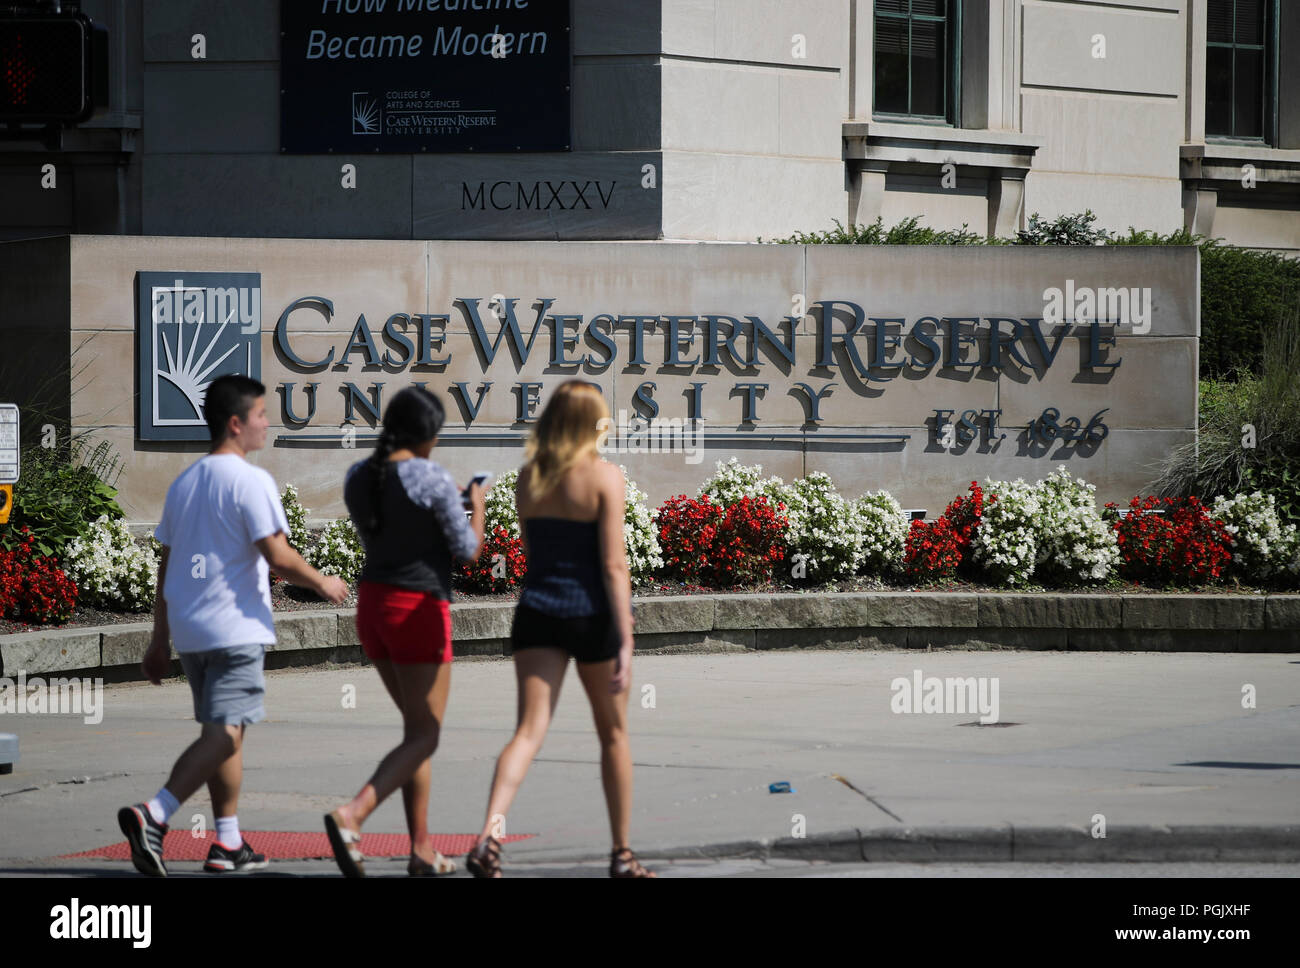 Ohio, USA. 23rd Aug, 2018. Students walk past the sign of Case Western Reserve University (CWRU) in Cleveland, Ohio, the United States, Aug. 23, 2018. It might not be as famous as the Ivy League schools, CWRU, located in Cleveland, the U.S. midwestern state of Ohio, is among the top American universities that Chinese students choose to study in. TO GO WITH Feature: Midwest U.S. university aspires to attract more Chinese students Credit: Wang Ying/Xinhua/Alamy Live News Stock Photo